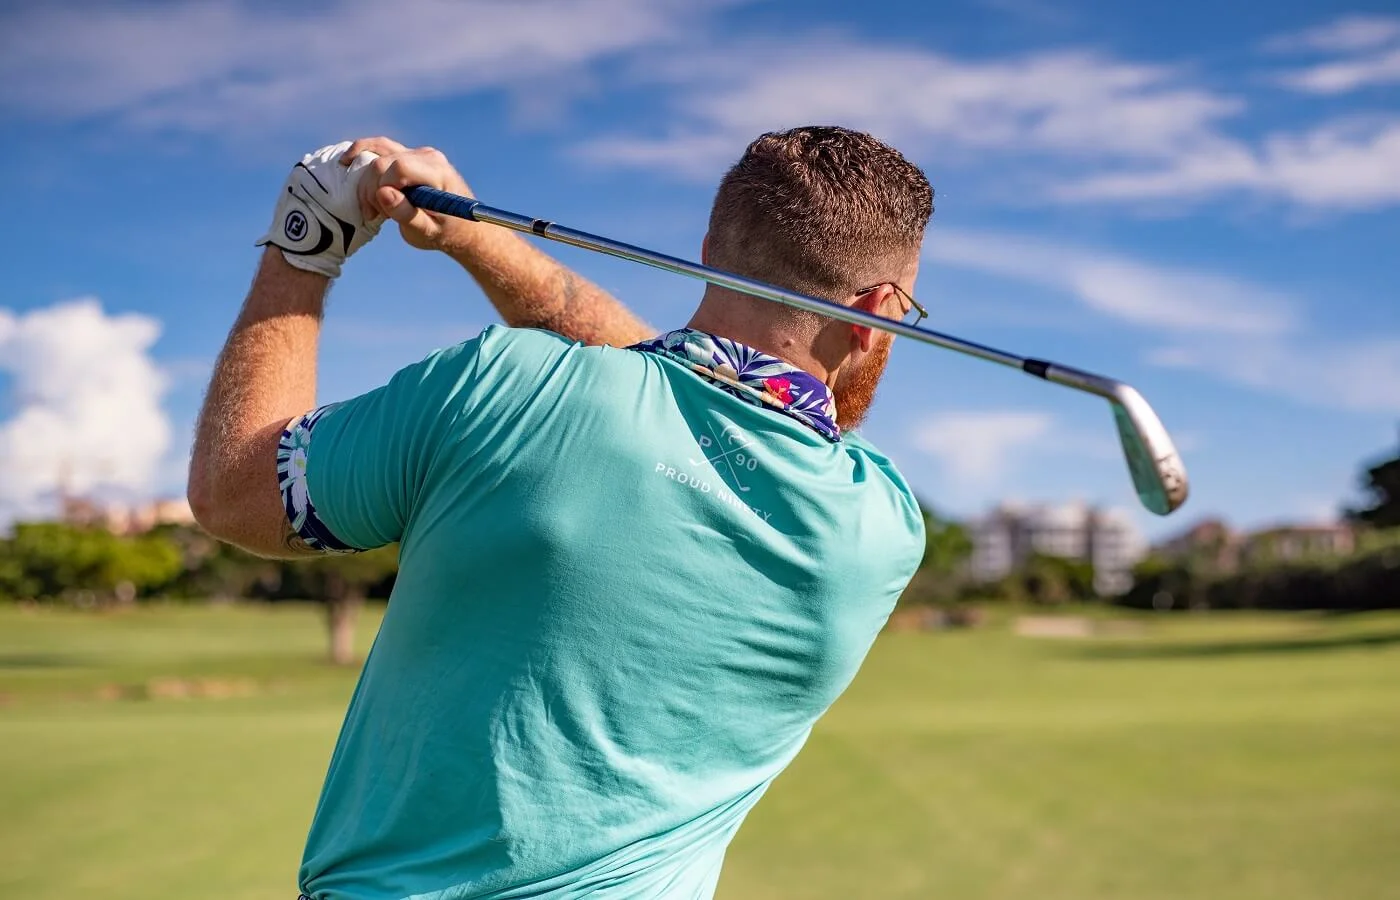 Make Par with These Unique Golf Lover Gift Ideas